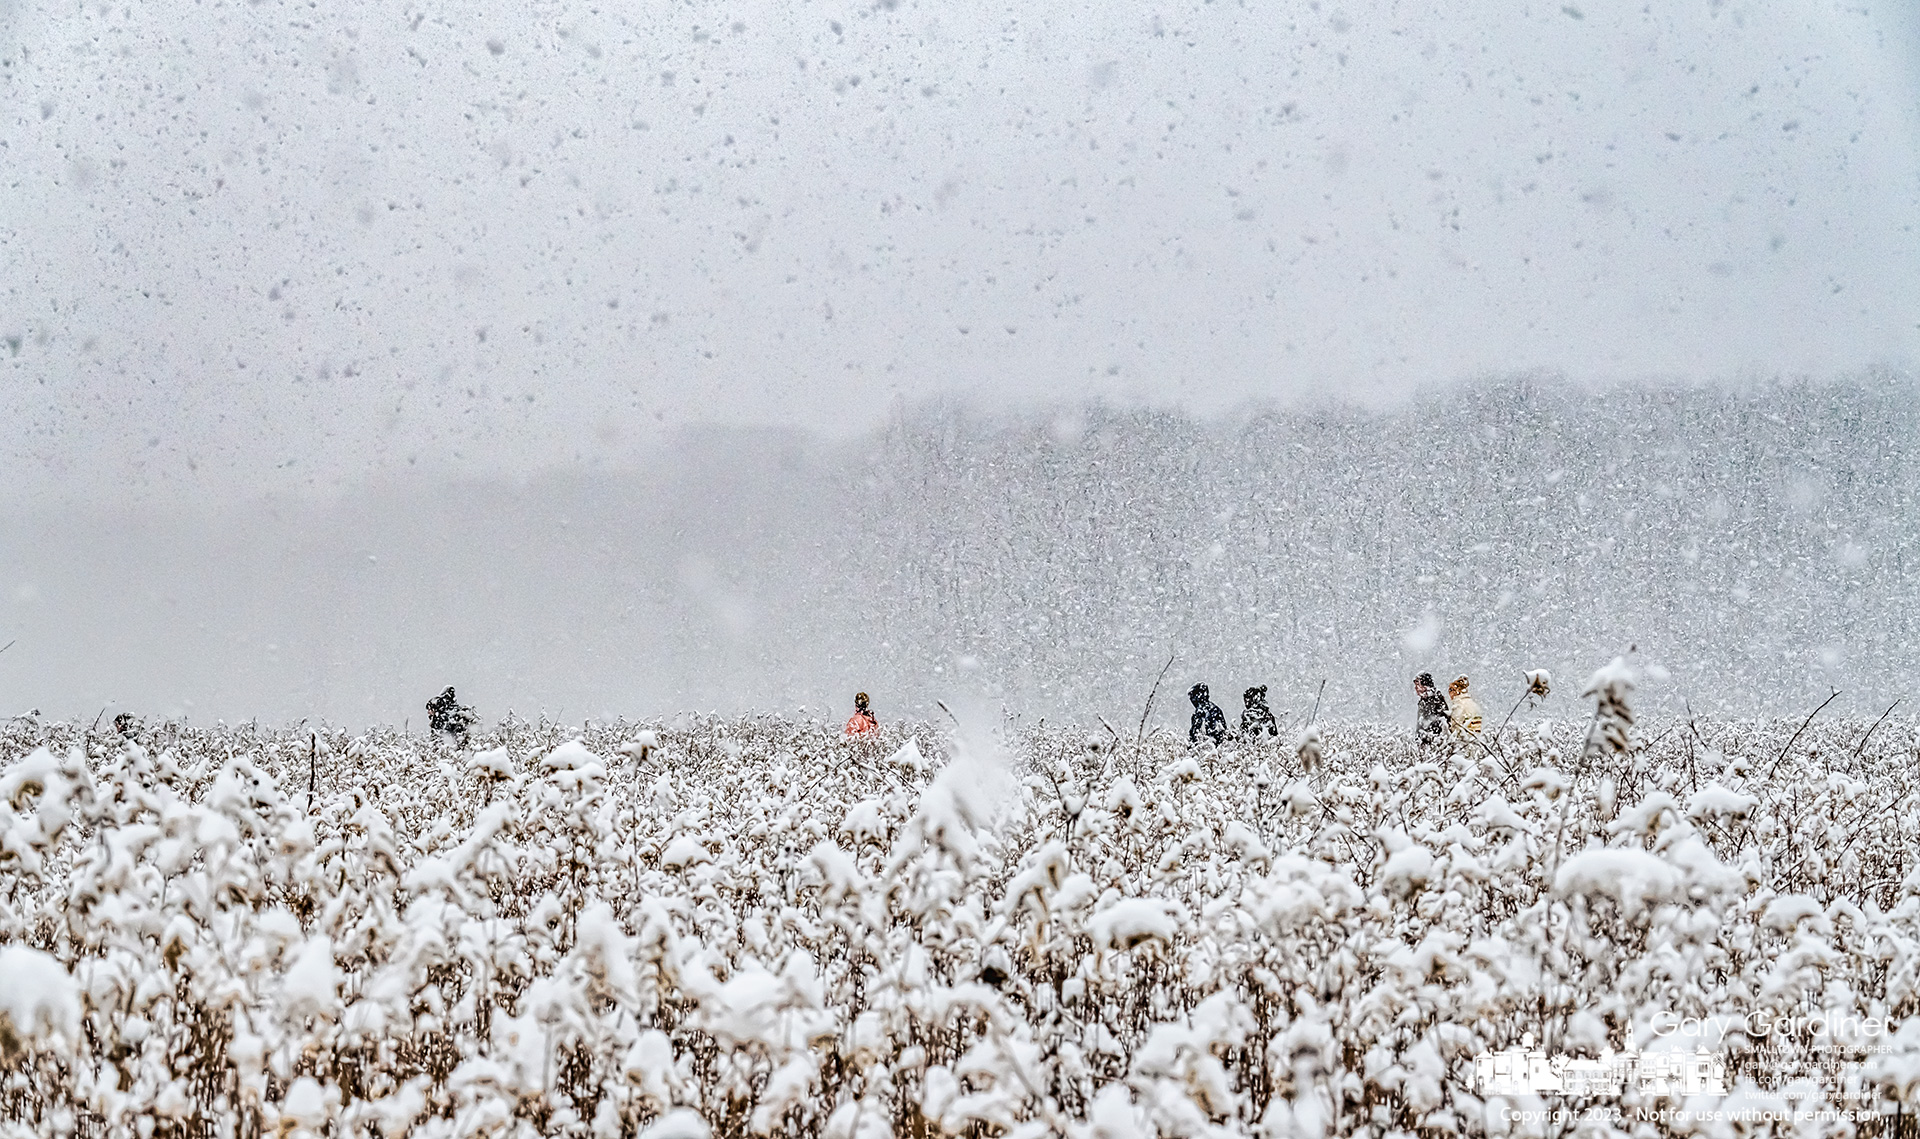 A band of intrepid walkers traverses their way through a snow-covered path through the prairie at Sharon Woods Metro Park during a Sunday morning snowfall that left several inches of white powder for their outing. My Final Photo for January 22, 2023.